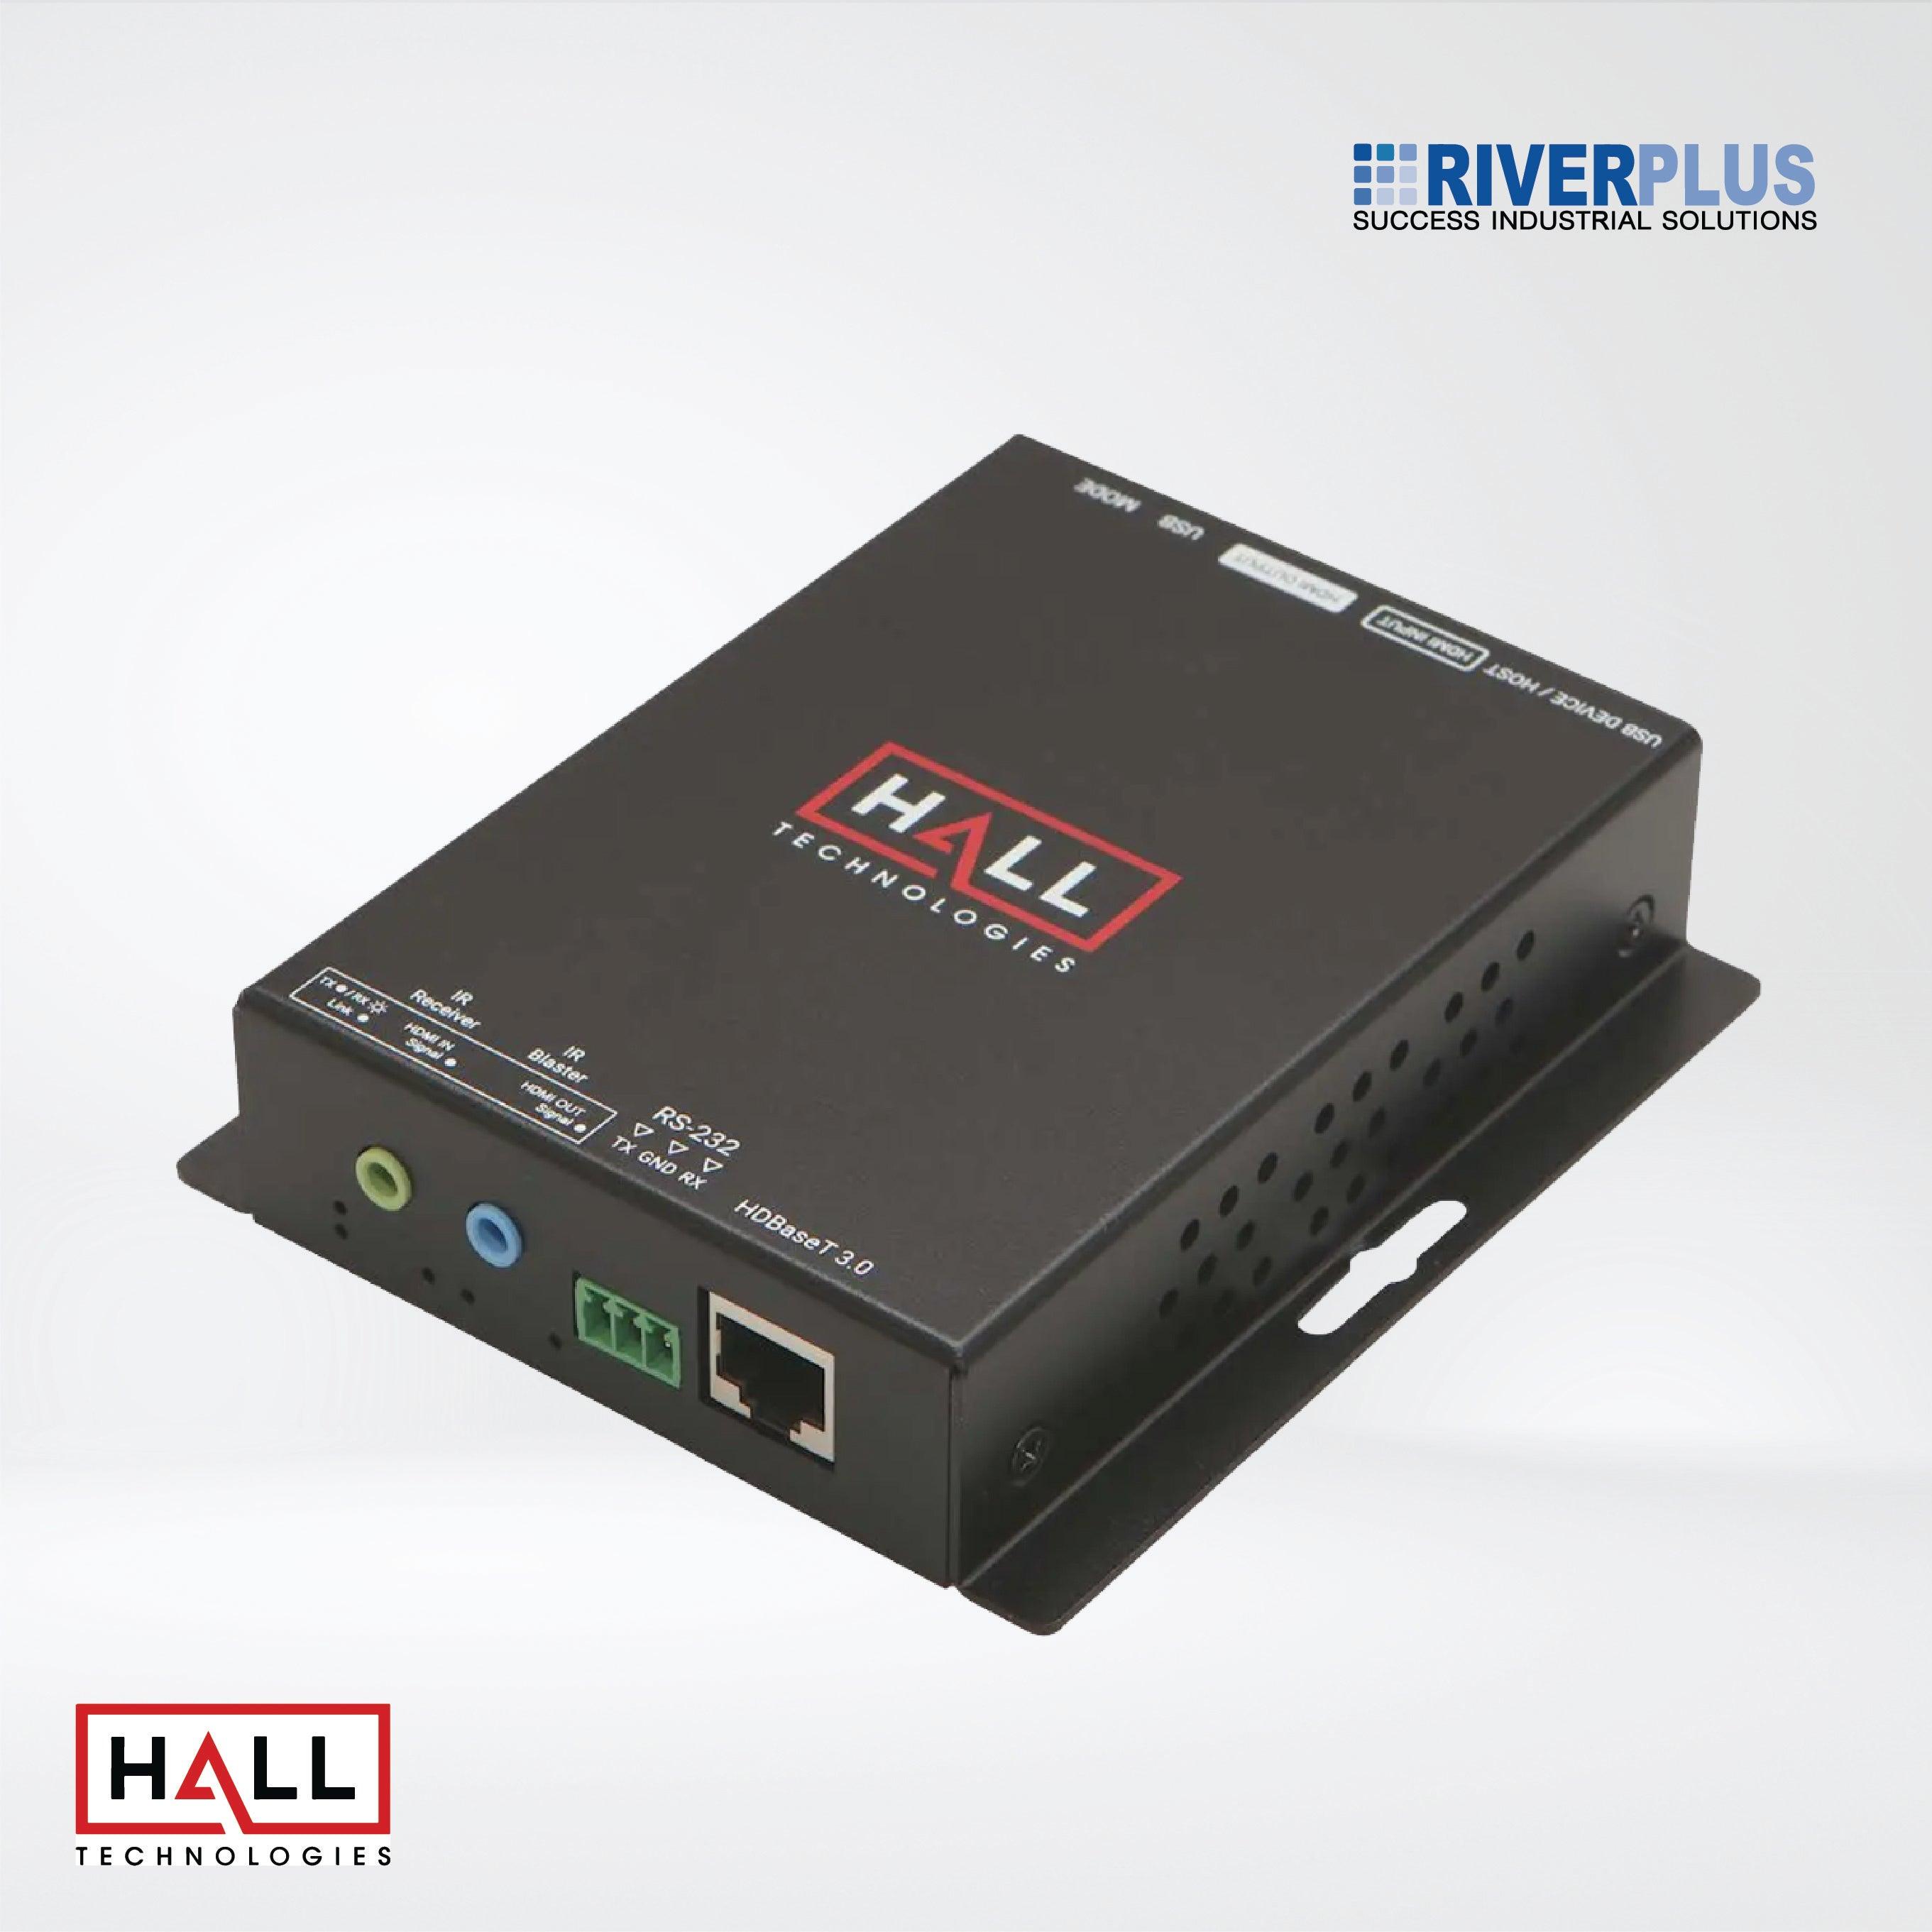 EXP-HDBT3-TRX100 And EX-HDBT3-RX100 HDBaseT Expansion Card (Transmitter and Receiver) for the EMCEE200 - Riverplus